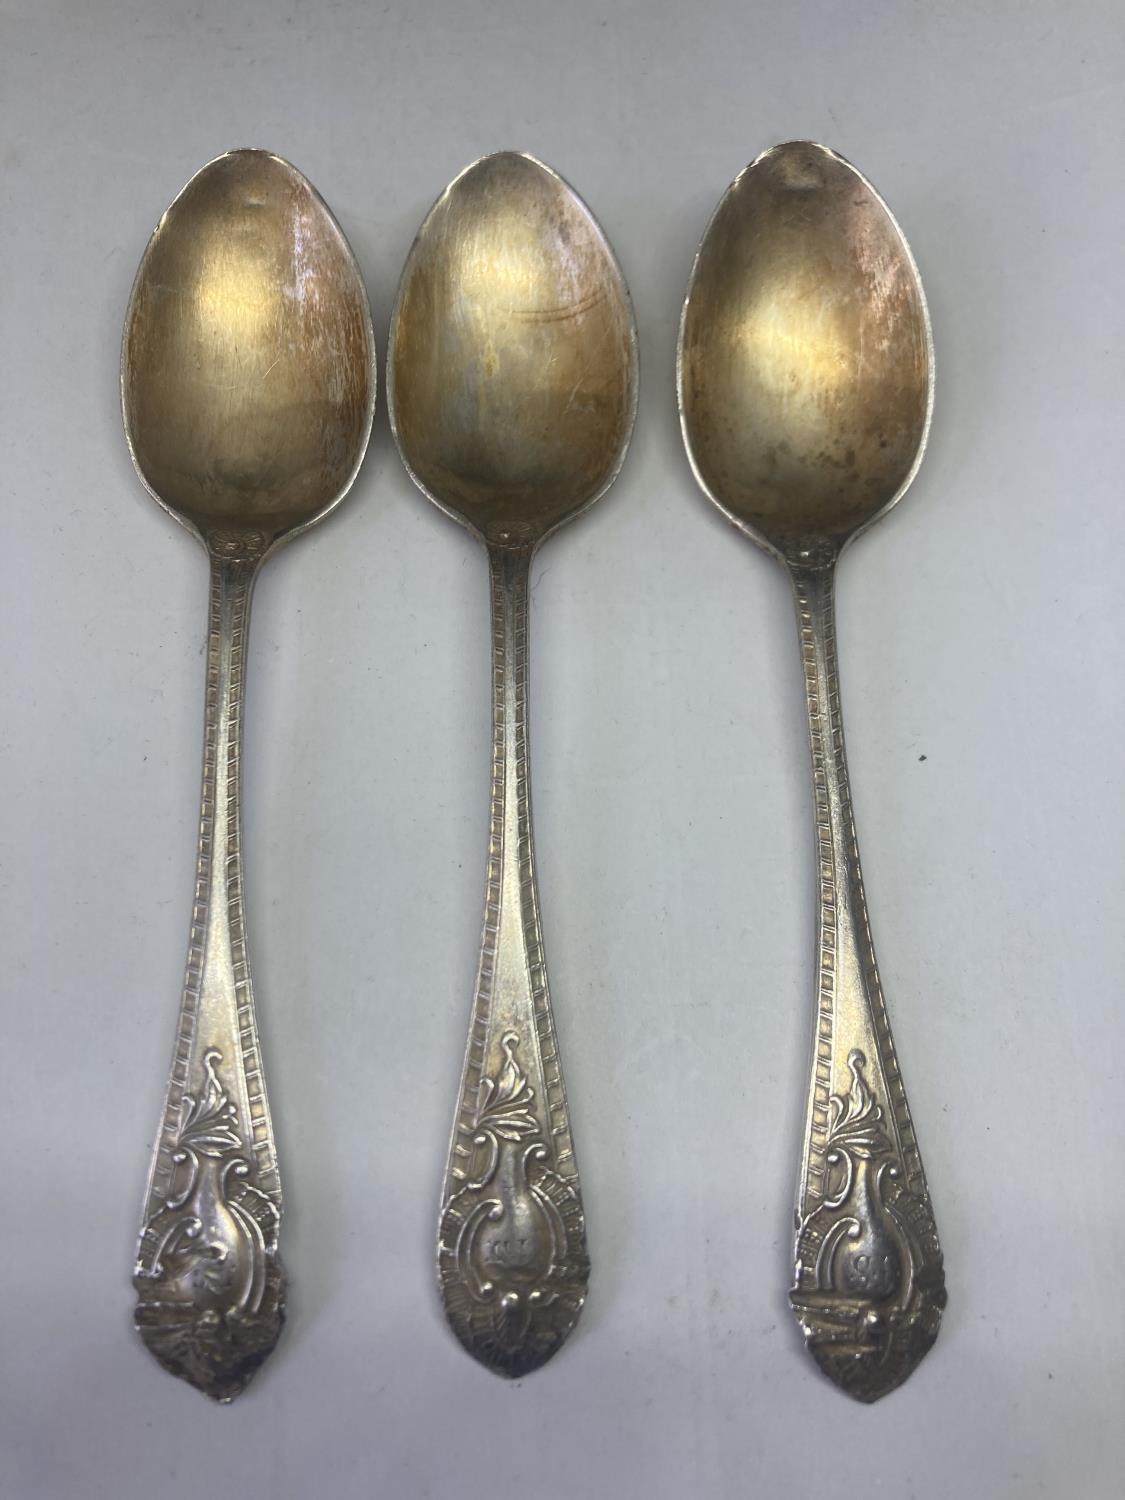 THREE HALLMARKED SHEFFILED SILVER TEASPOONS GROSS WEIGHT 75.65 GRAMS - Image 2 of 6